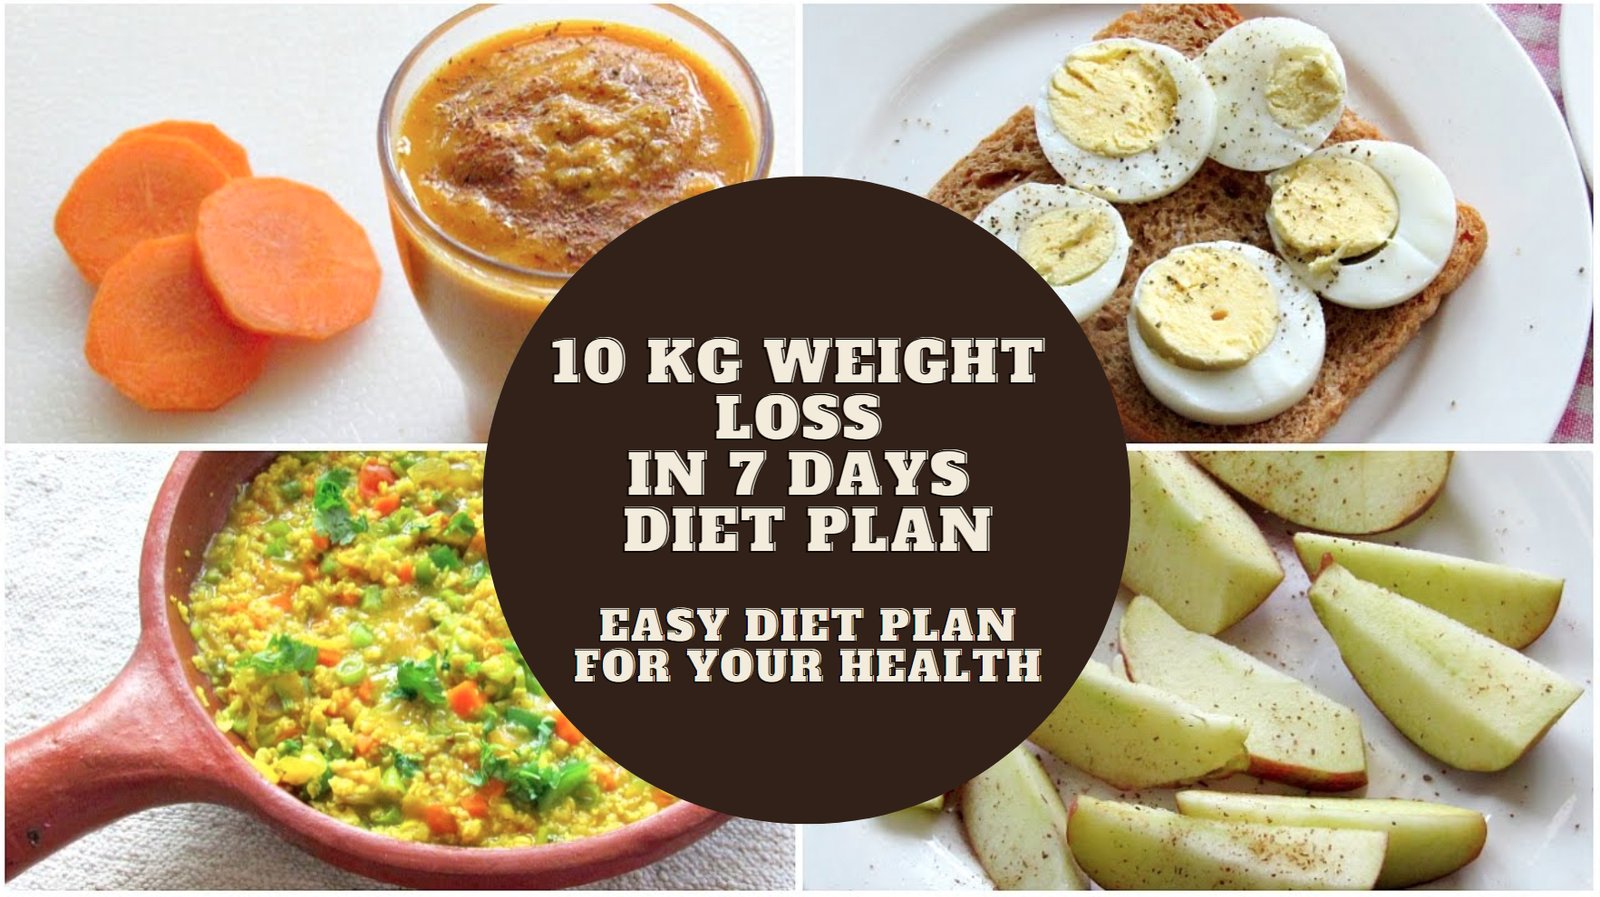 10 Kg Weight Loss in 7 Days Diet Plan - Easy Diet Plan for your Health